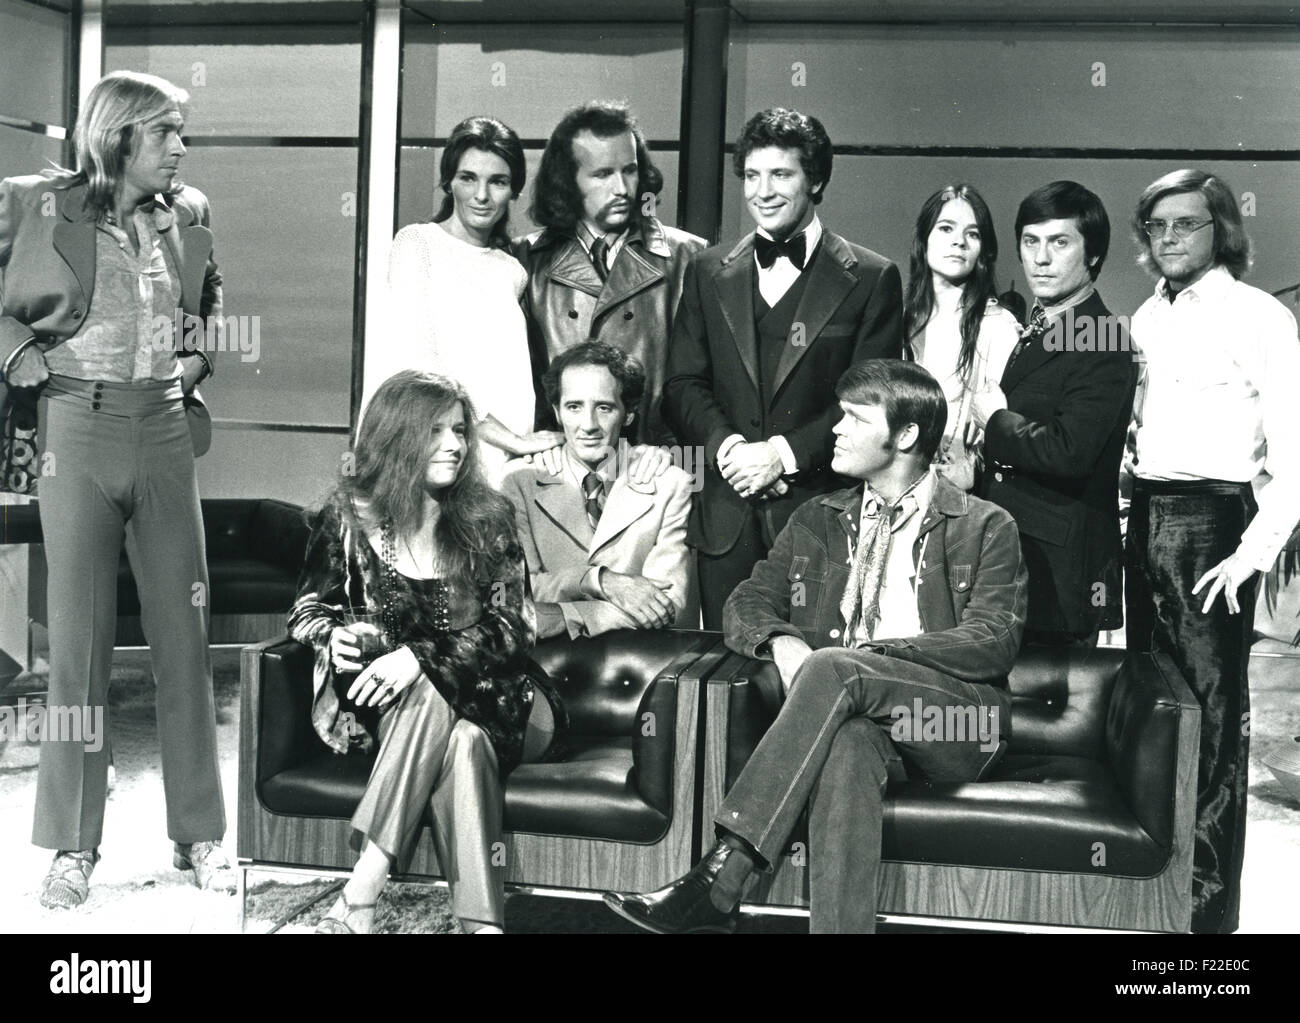 TOM JONES Welsh singer on his TV show 'This is Tom Jones' in 1969. Seated are Janis Joplin and Glen Campbell. Photo Polygram Stock Photo